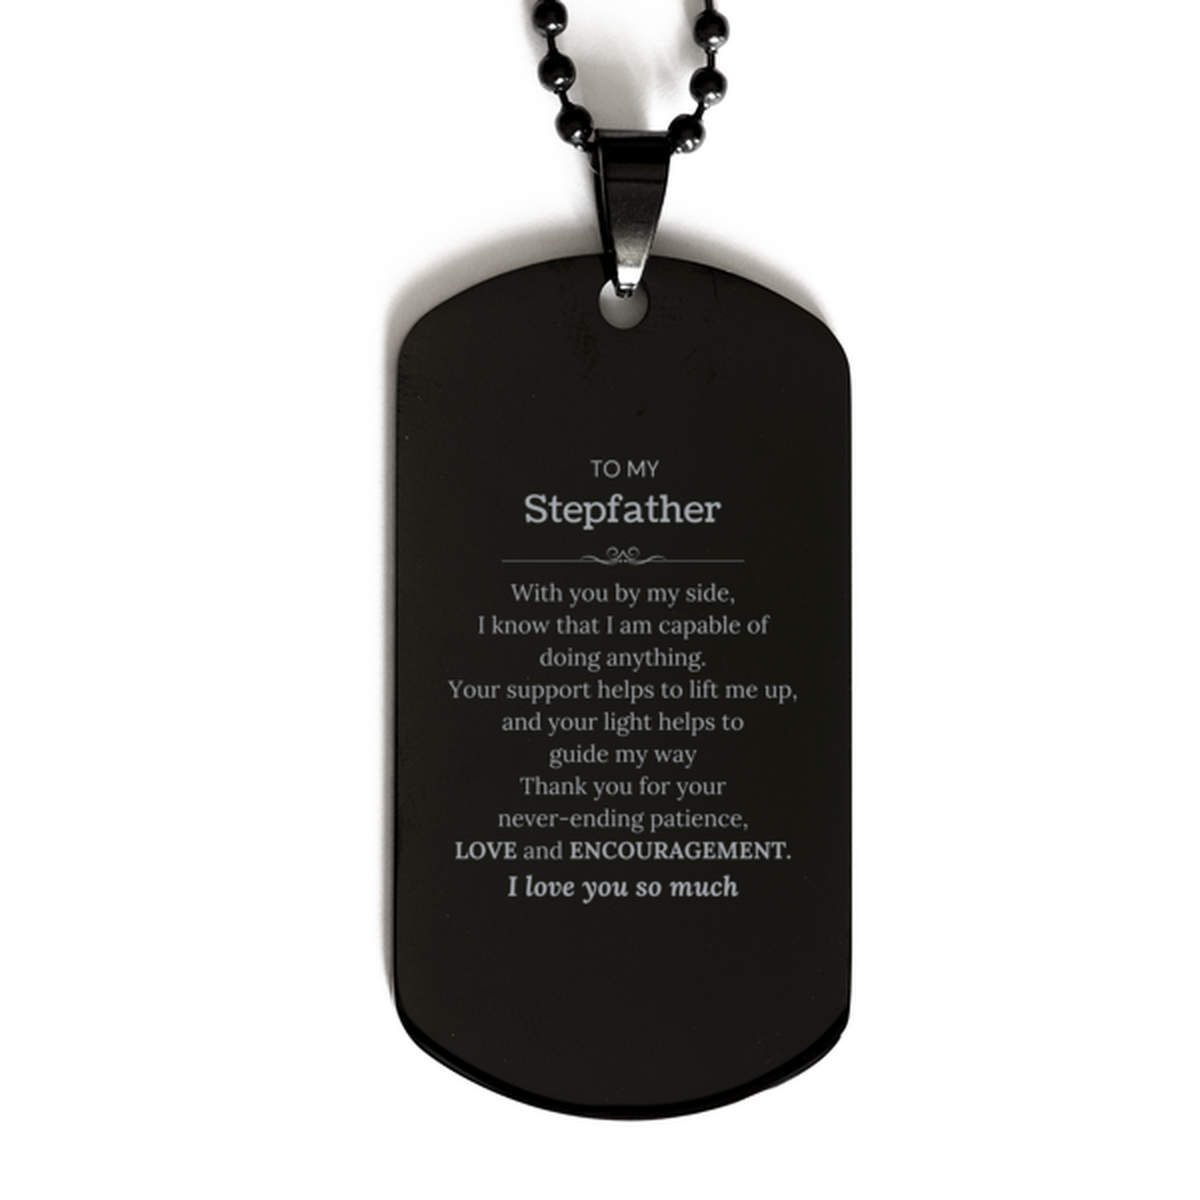 Appreciation Stepfather Black Dog Tag Gifts, To My Stepfather Birthday Christmas Wedding Keepsake Gifts for Stepfather With you by my side, I know that I am capable of doing anything. I love you so much